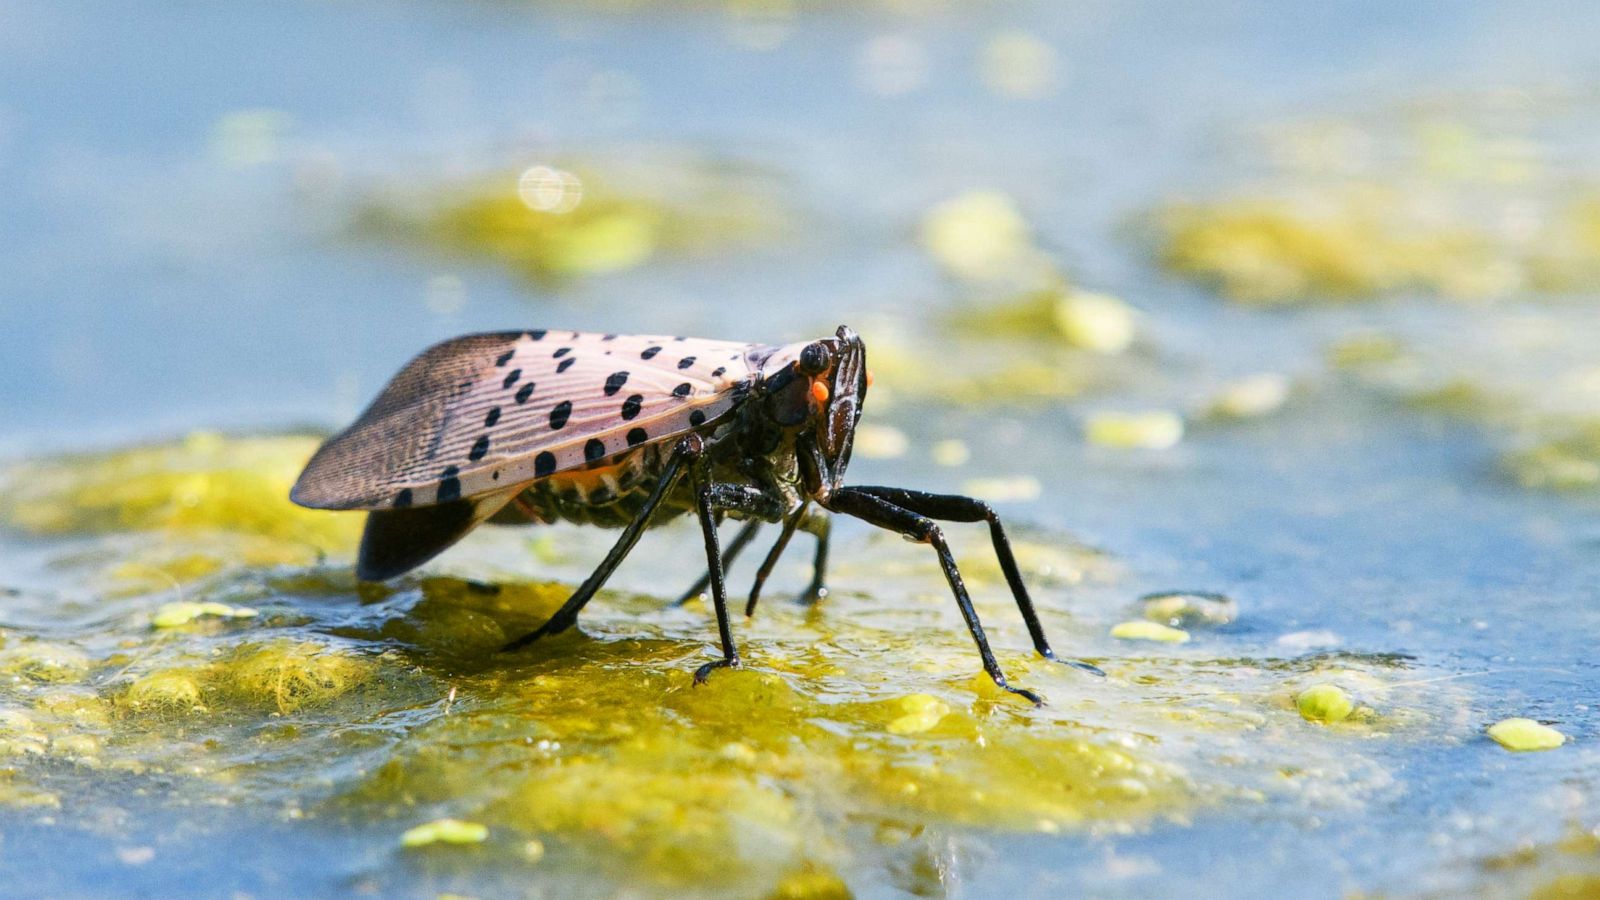 Wildlife officials urge people to kill spotted lanternflies as insect  spreads across US - Good Morning America